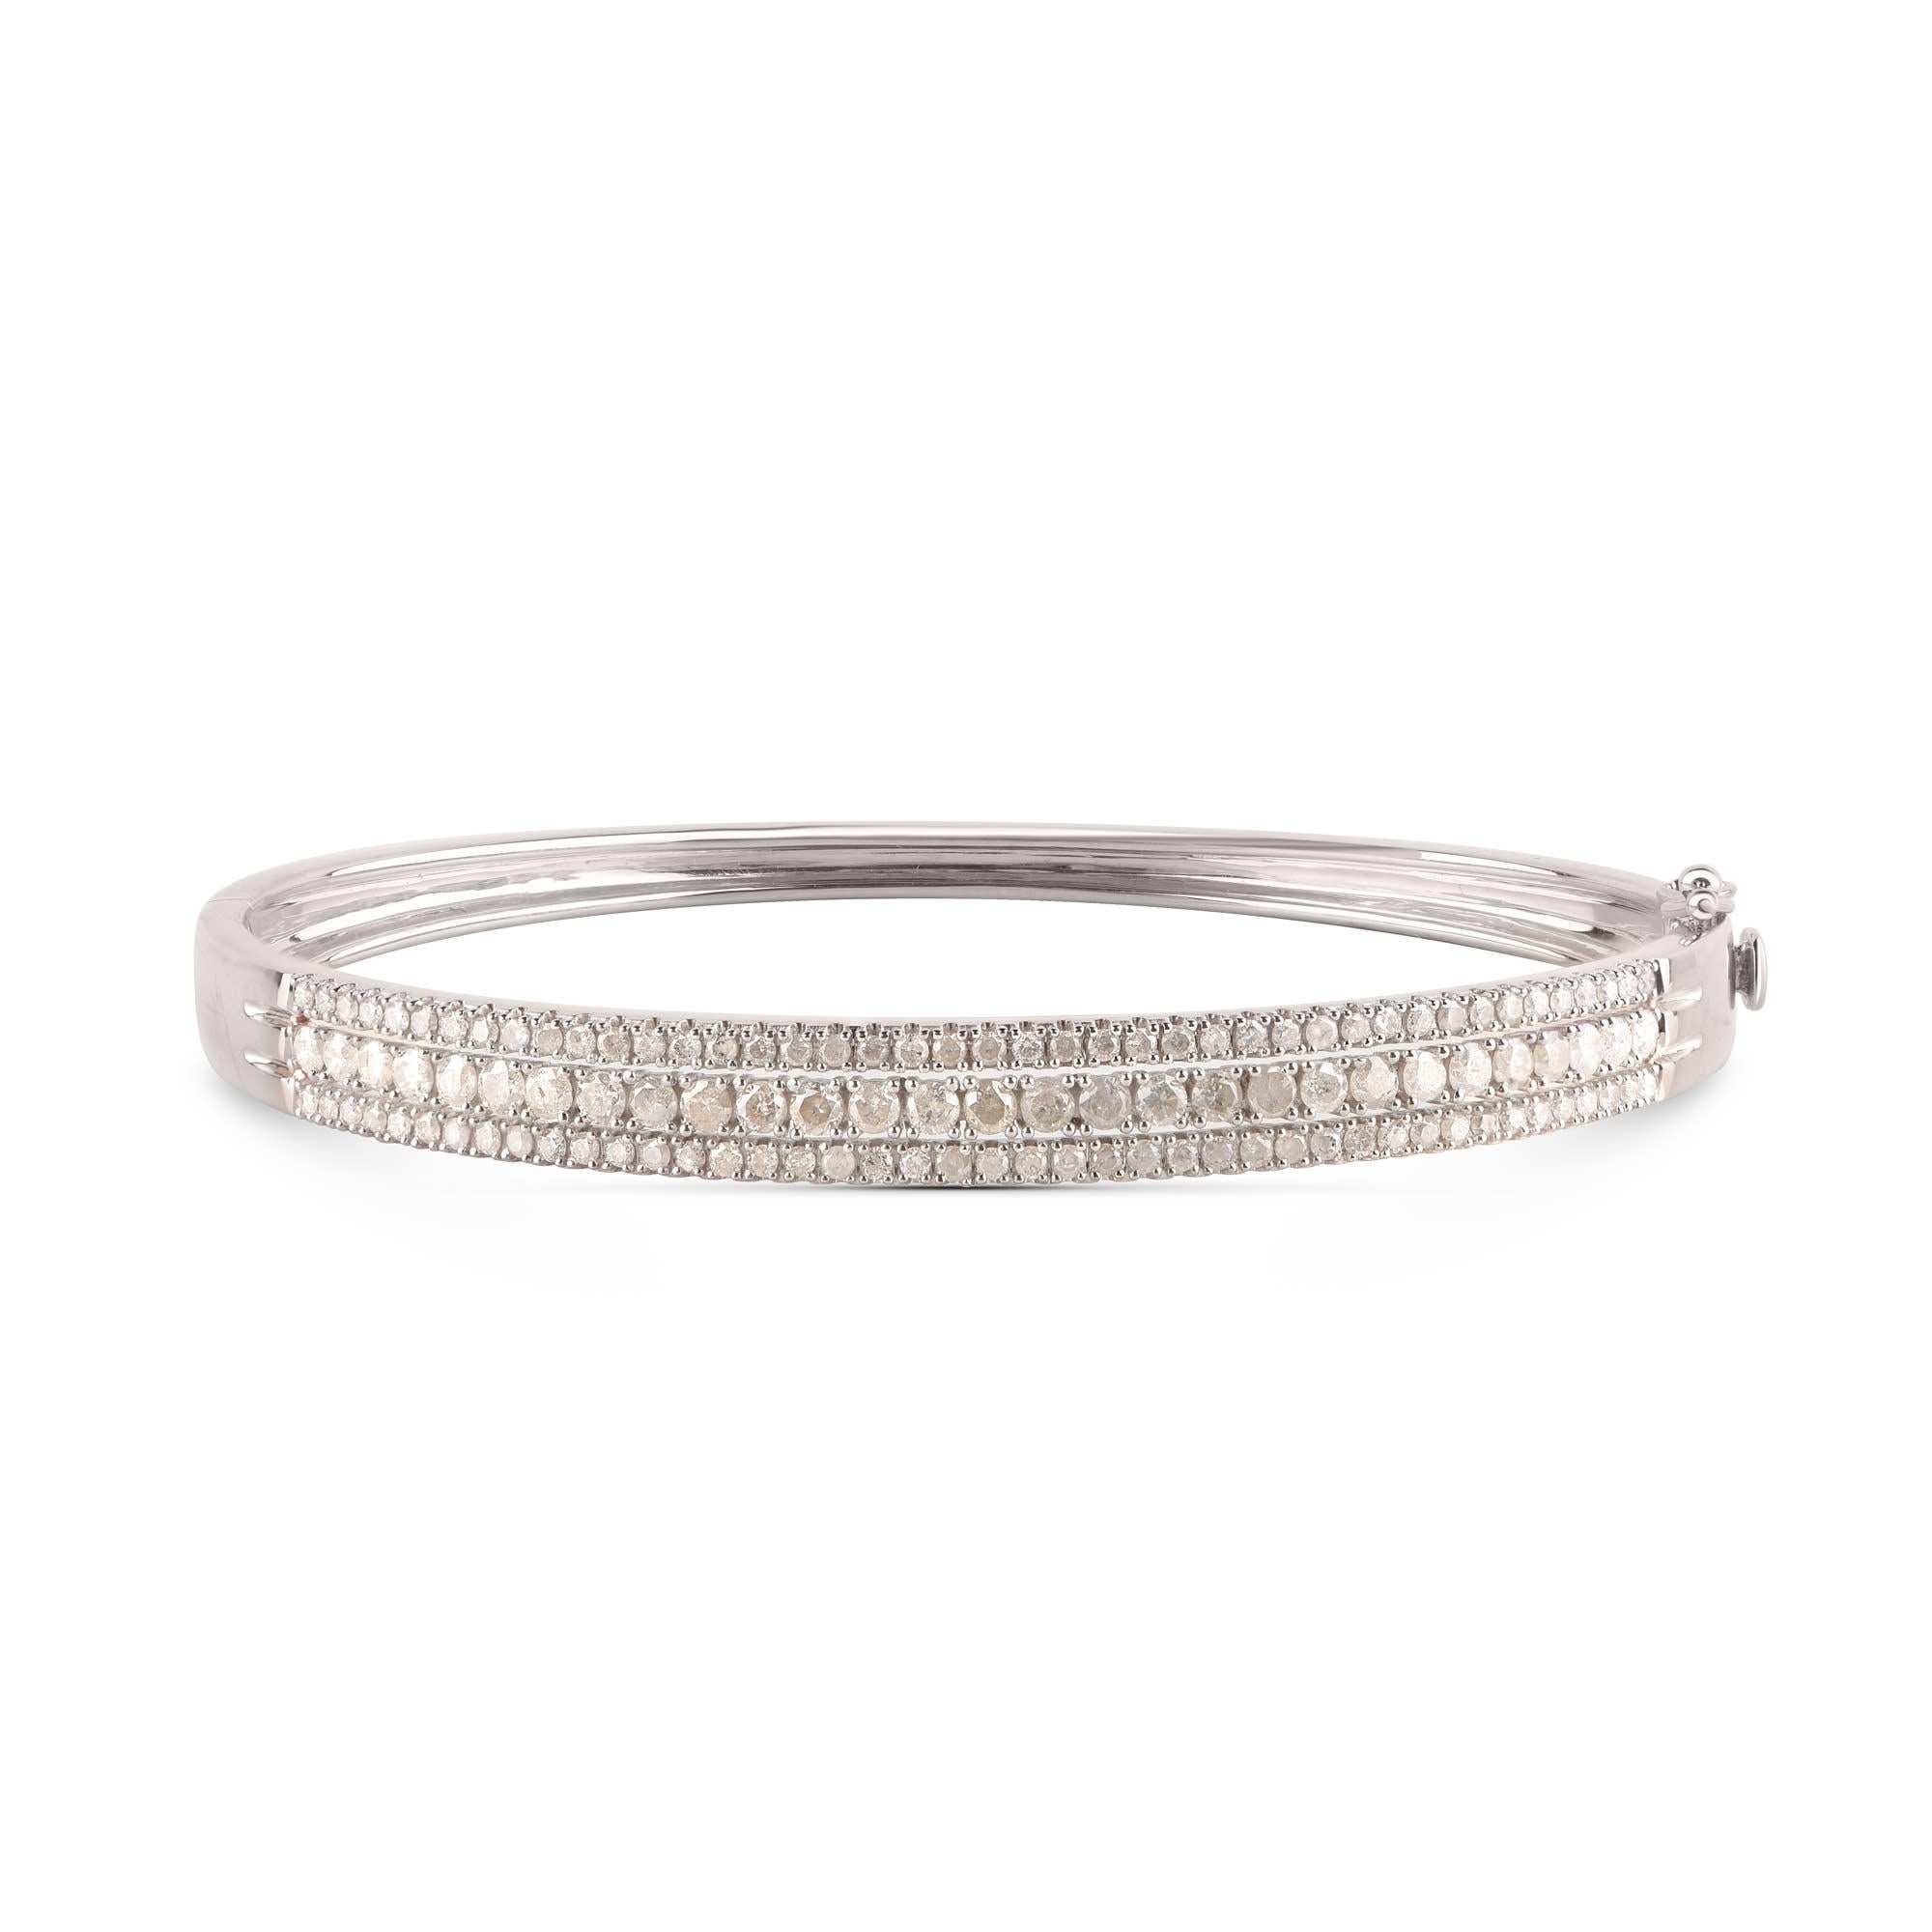 This classic diamond bangle is handcrafted by our in-house craftsmen in 14-karat white gold and studded with 115 brilliant-cut diamonds in prong setting. The diamonds are graded H-I Color, I2 Clarity.